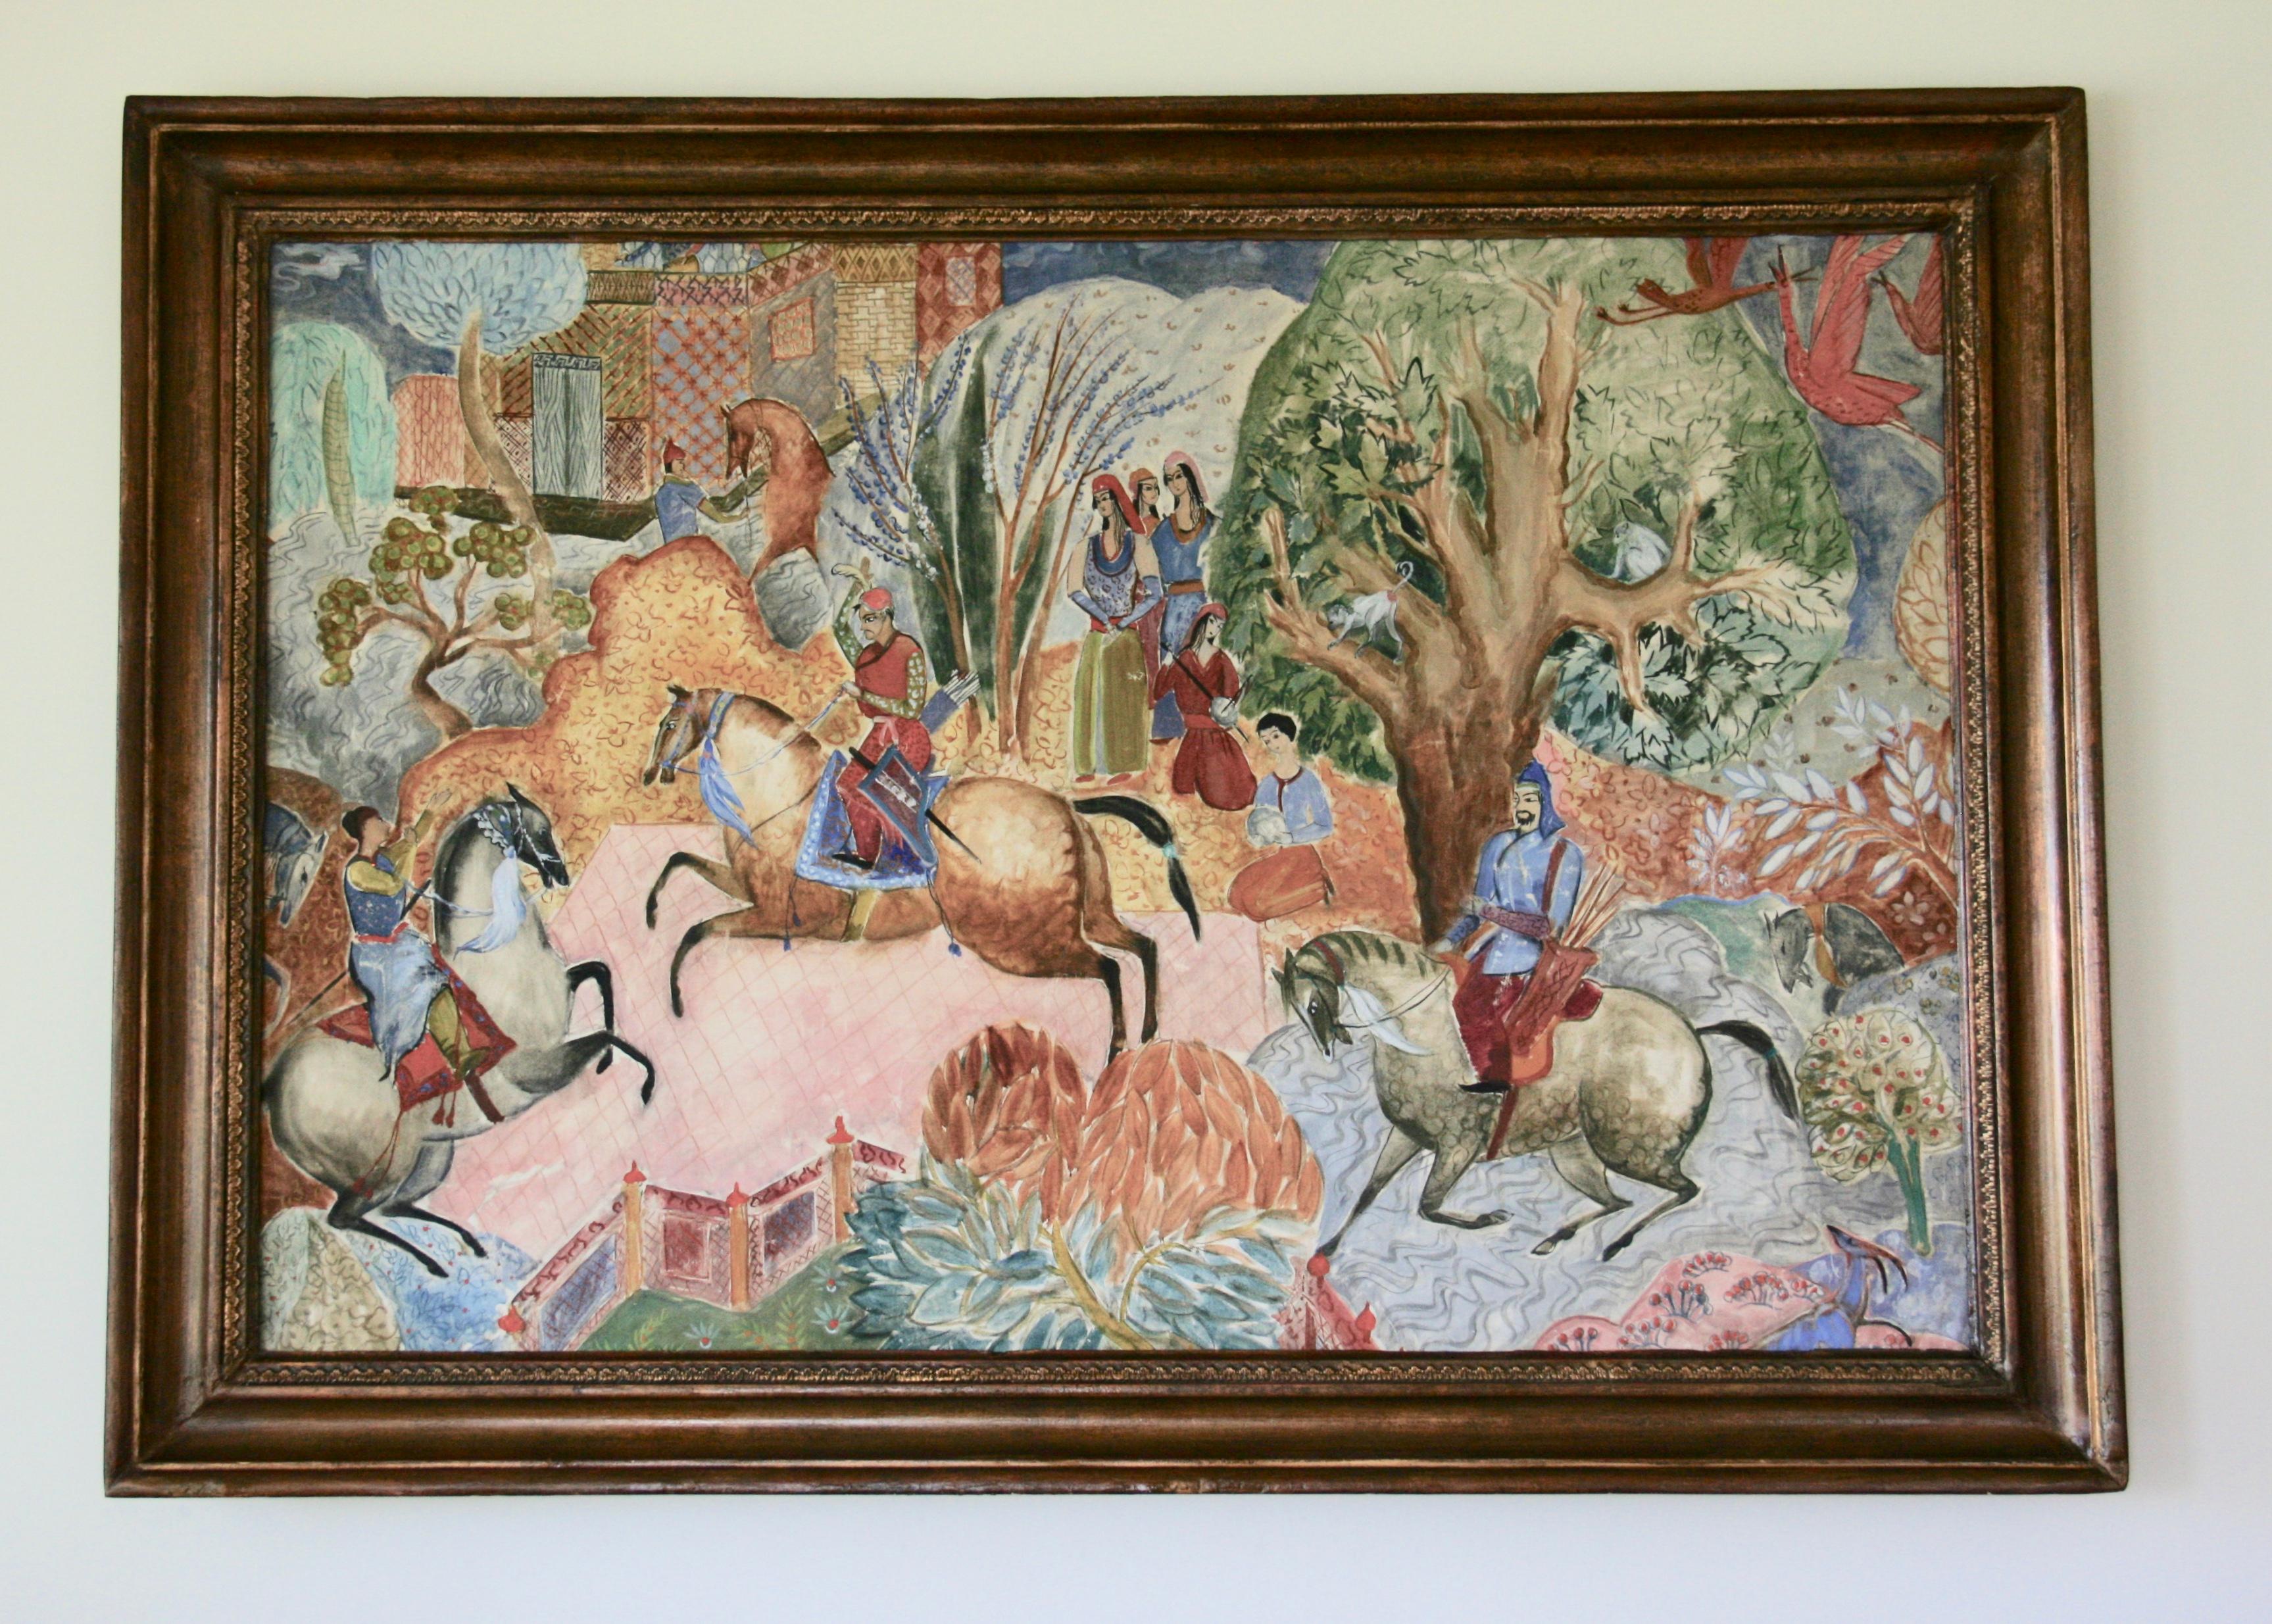 Unknown Figurative Painting - Large Scale Persian Hunt Landscape Painting